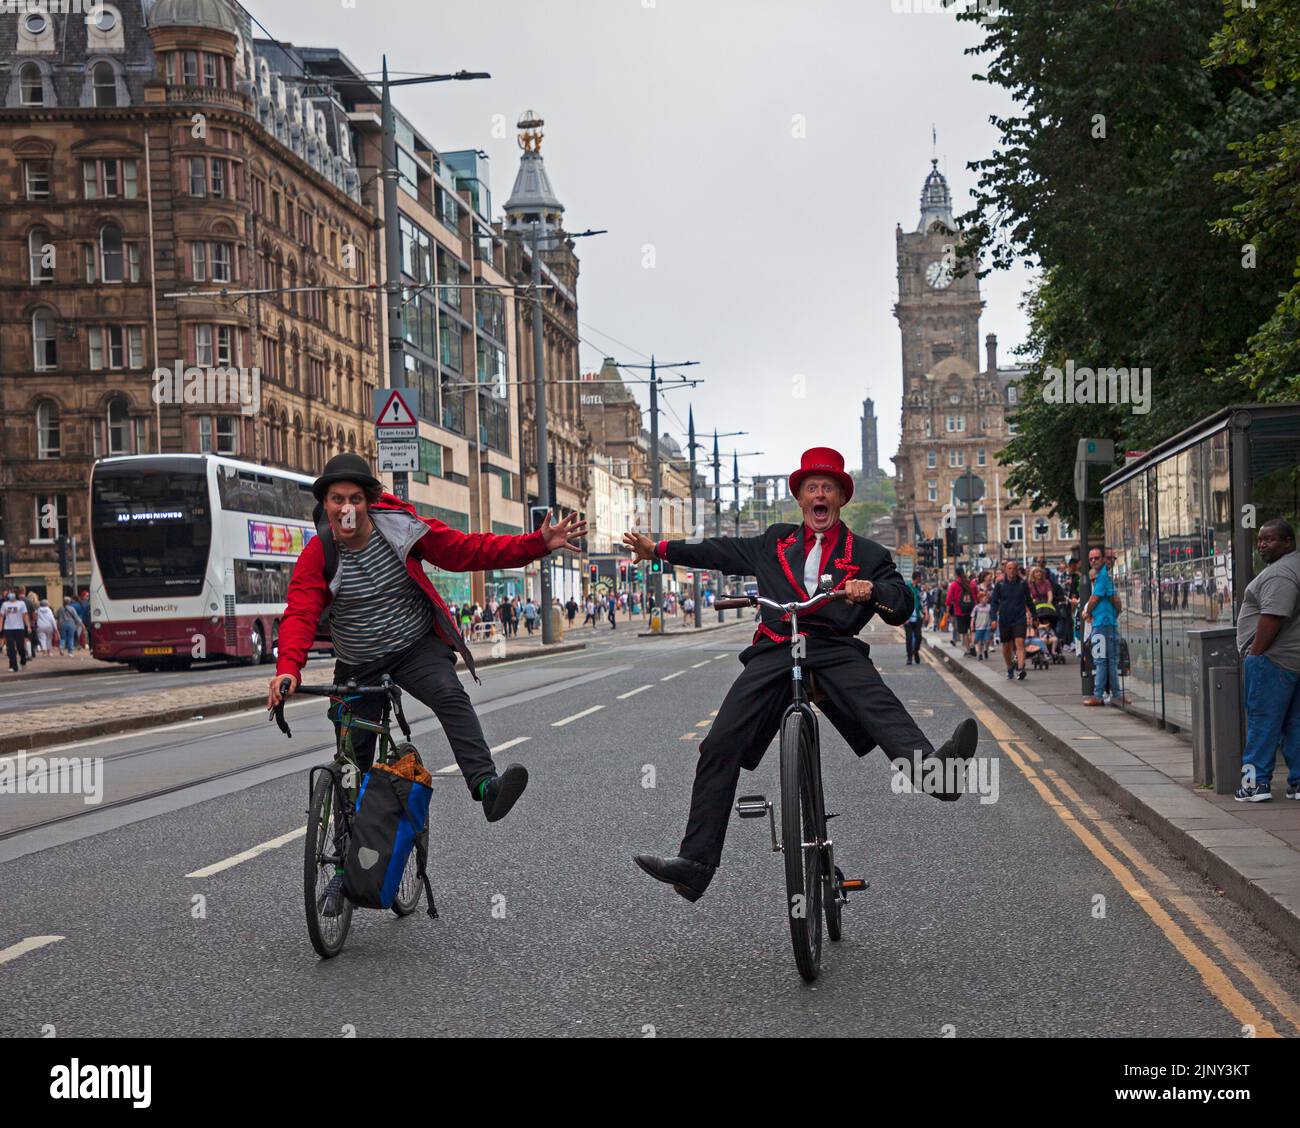 Princes Street, Edinburgh, Scotland, UK. EdFringe street performers, Todd Various on his adapted Penny Farthing bicycle and Mat Keys on his road bike have an unplanned fun race along Princes Street much to the amusement of passersby. Credit: Arch White/alamy live news. Stock Photo